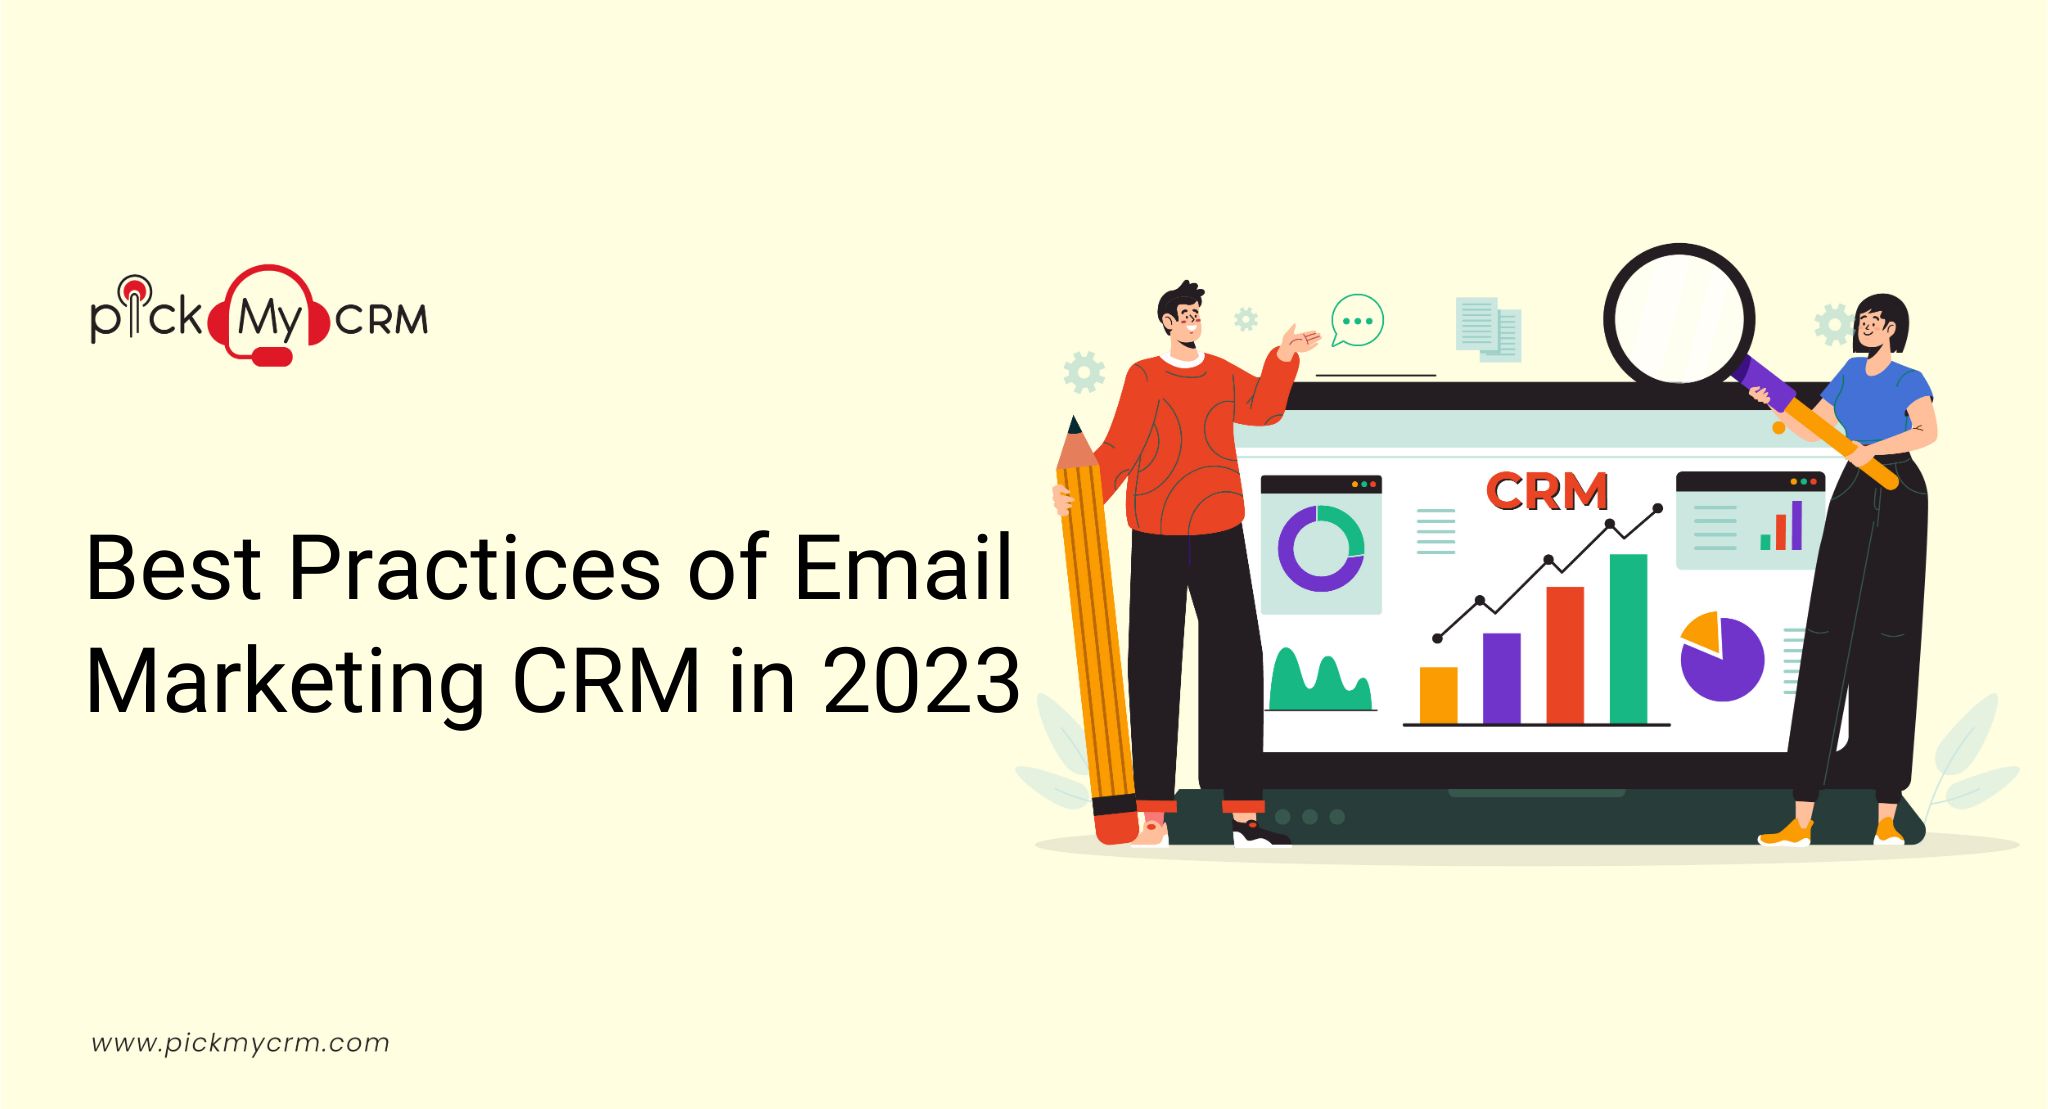 Best Practices of Email Marketing CRM